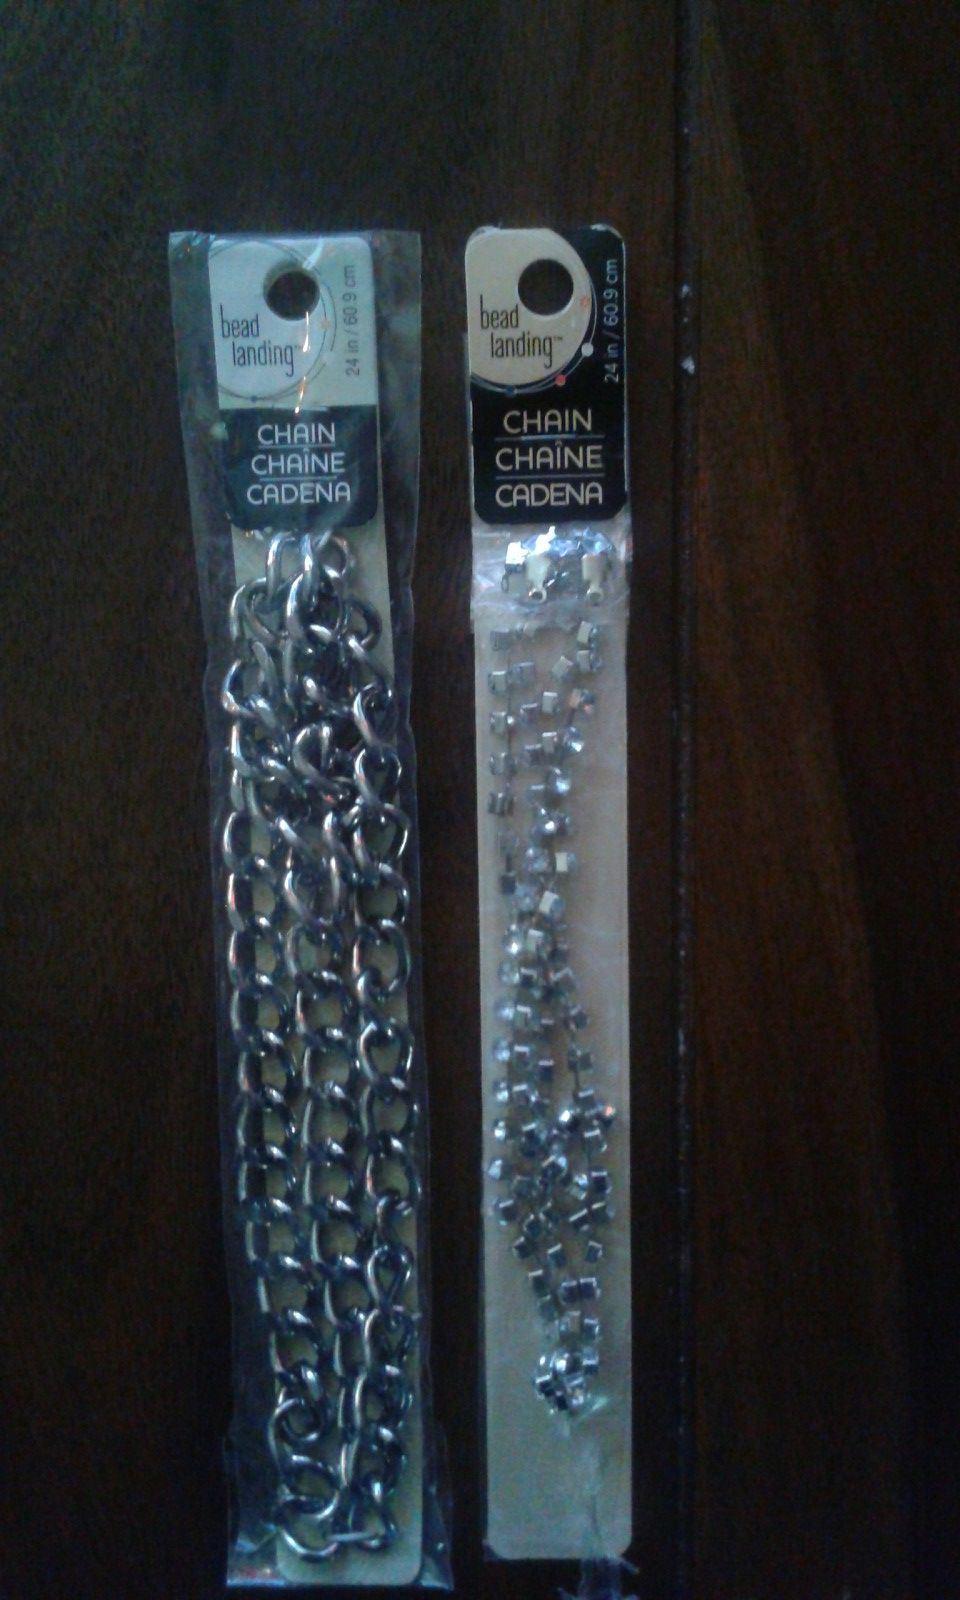 Two 24" Bead Landing Chains